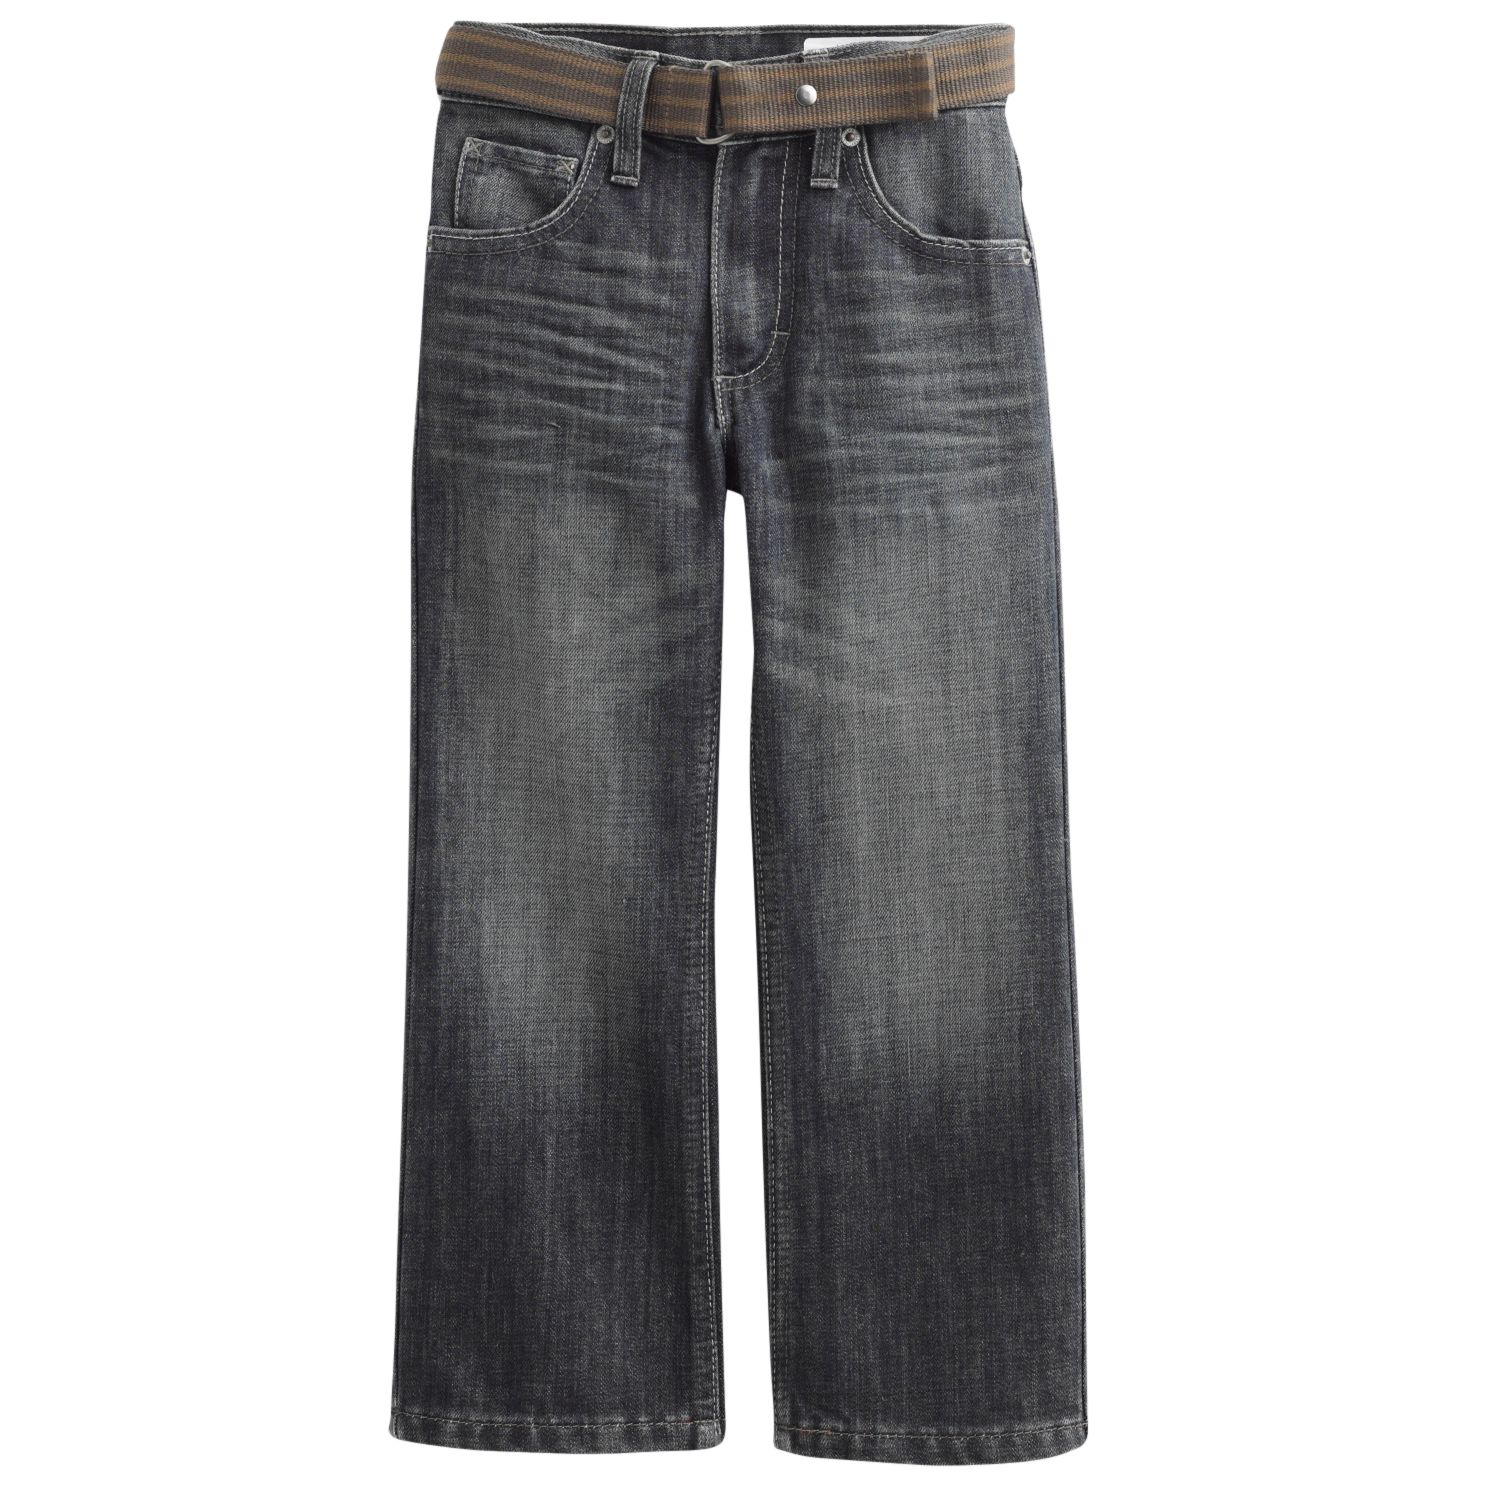 lee dungarees relaxed bootcut jeans